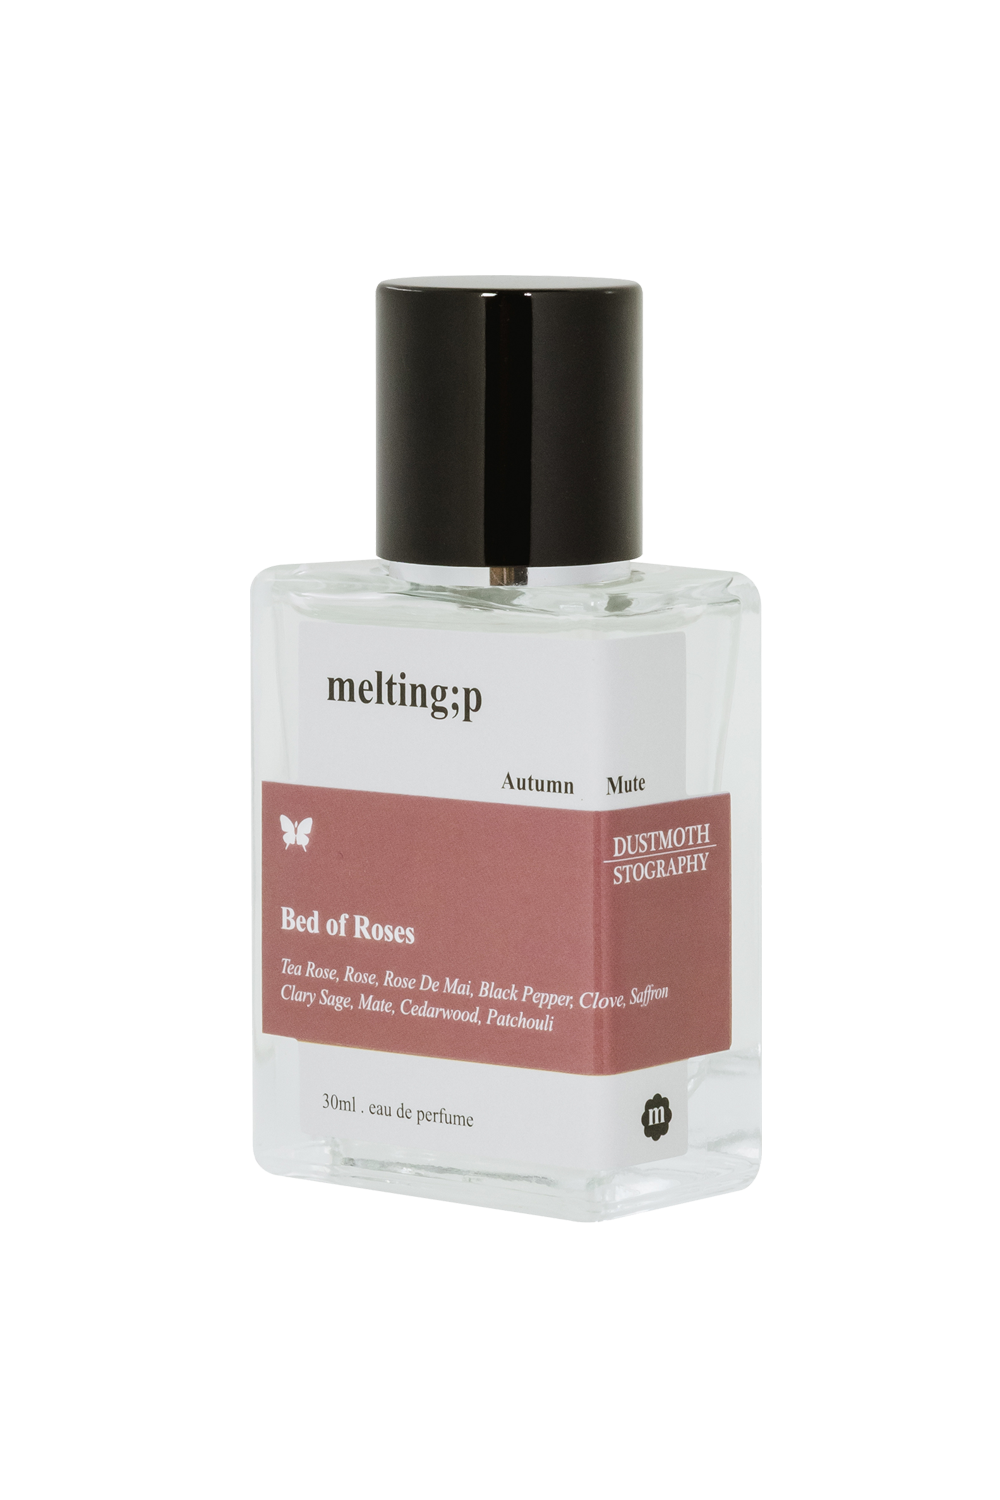 Bed of Roses (Autumn Mute) 30ml